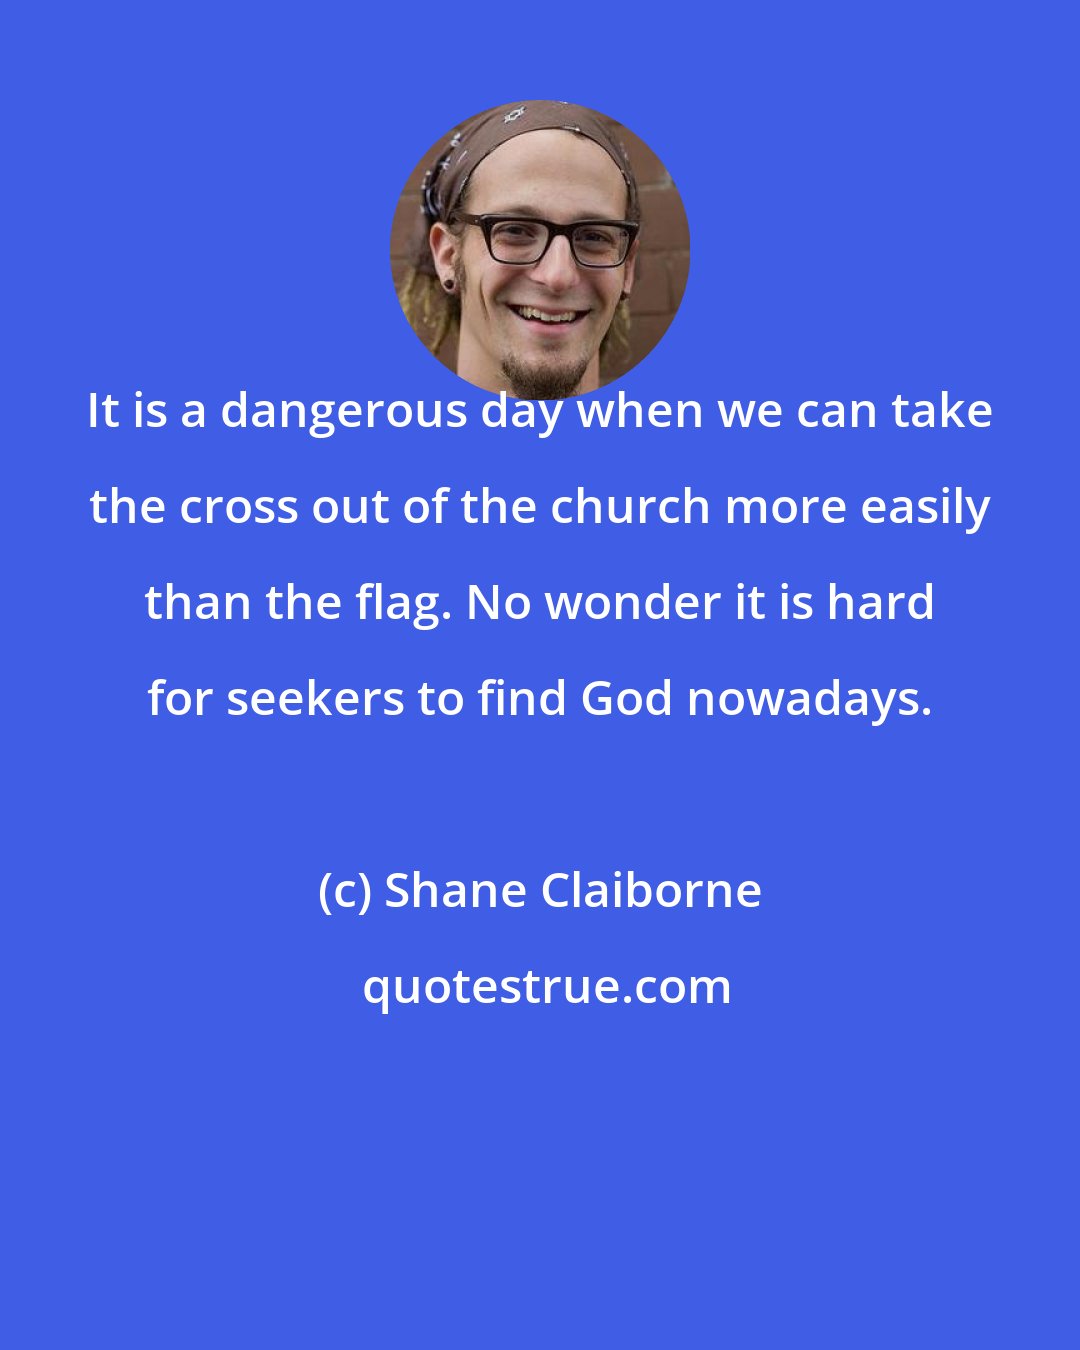 Shane Claiborne: It is a dangerous day when we can take the cross out of the church more easily than the flag. No wonder it is hard for seekers to find God nowadays.